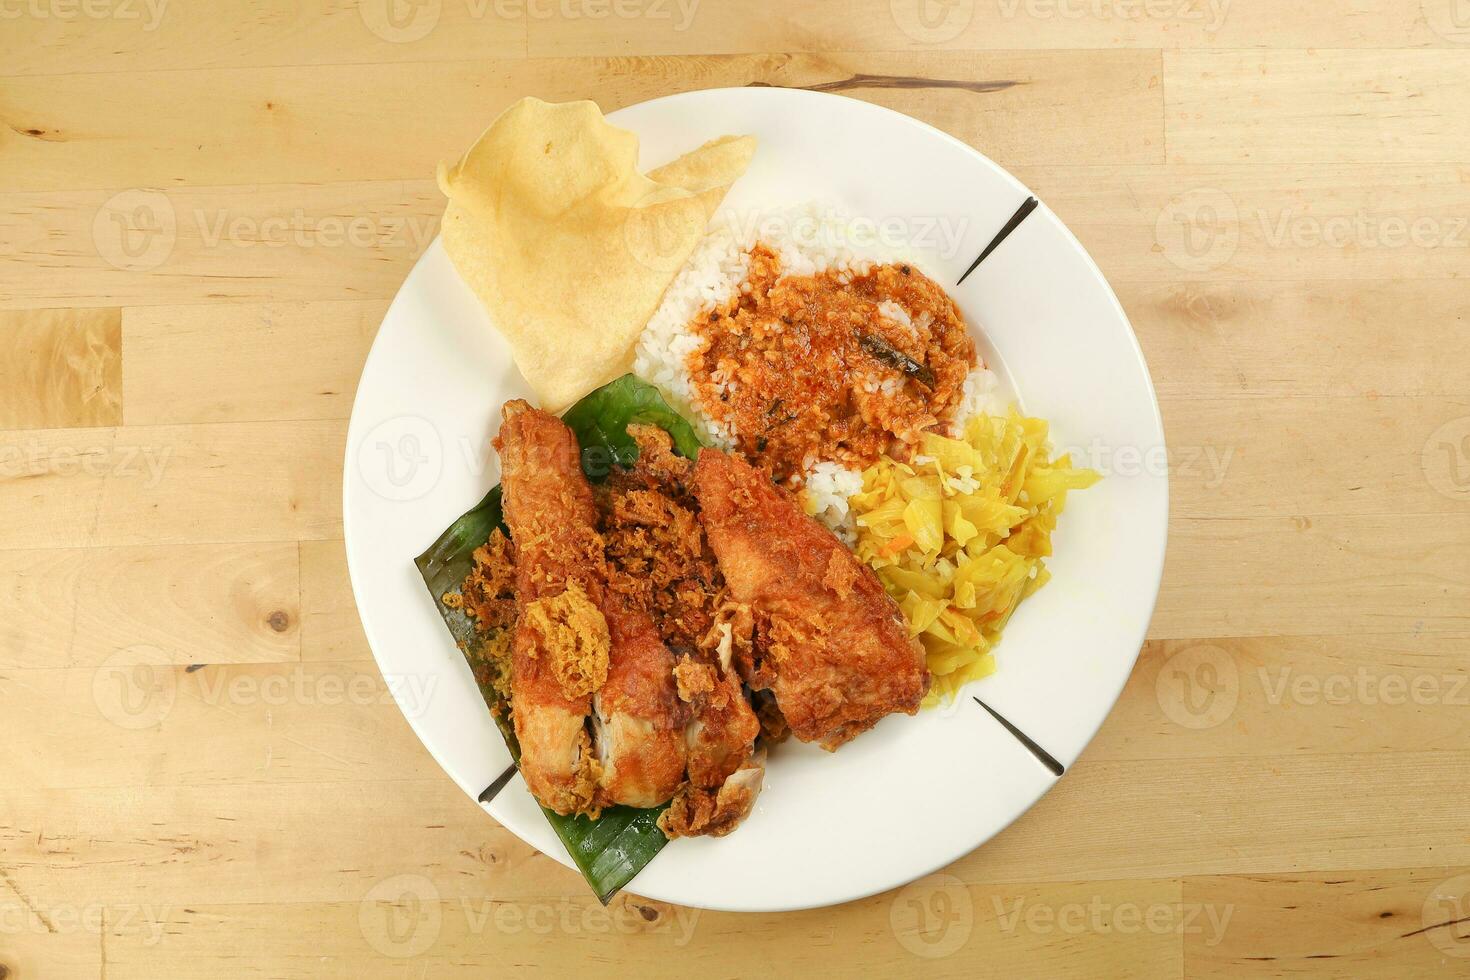 Traditional Malaysian Indian food white rice cabbage vegetable meat deep fried chopped chicken leg topped up with spicy mix gravy wood table background photo